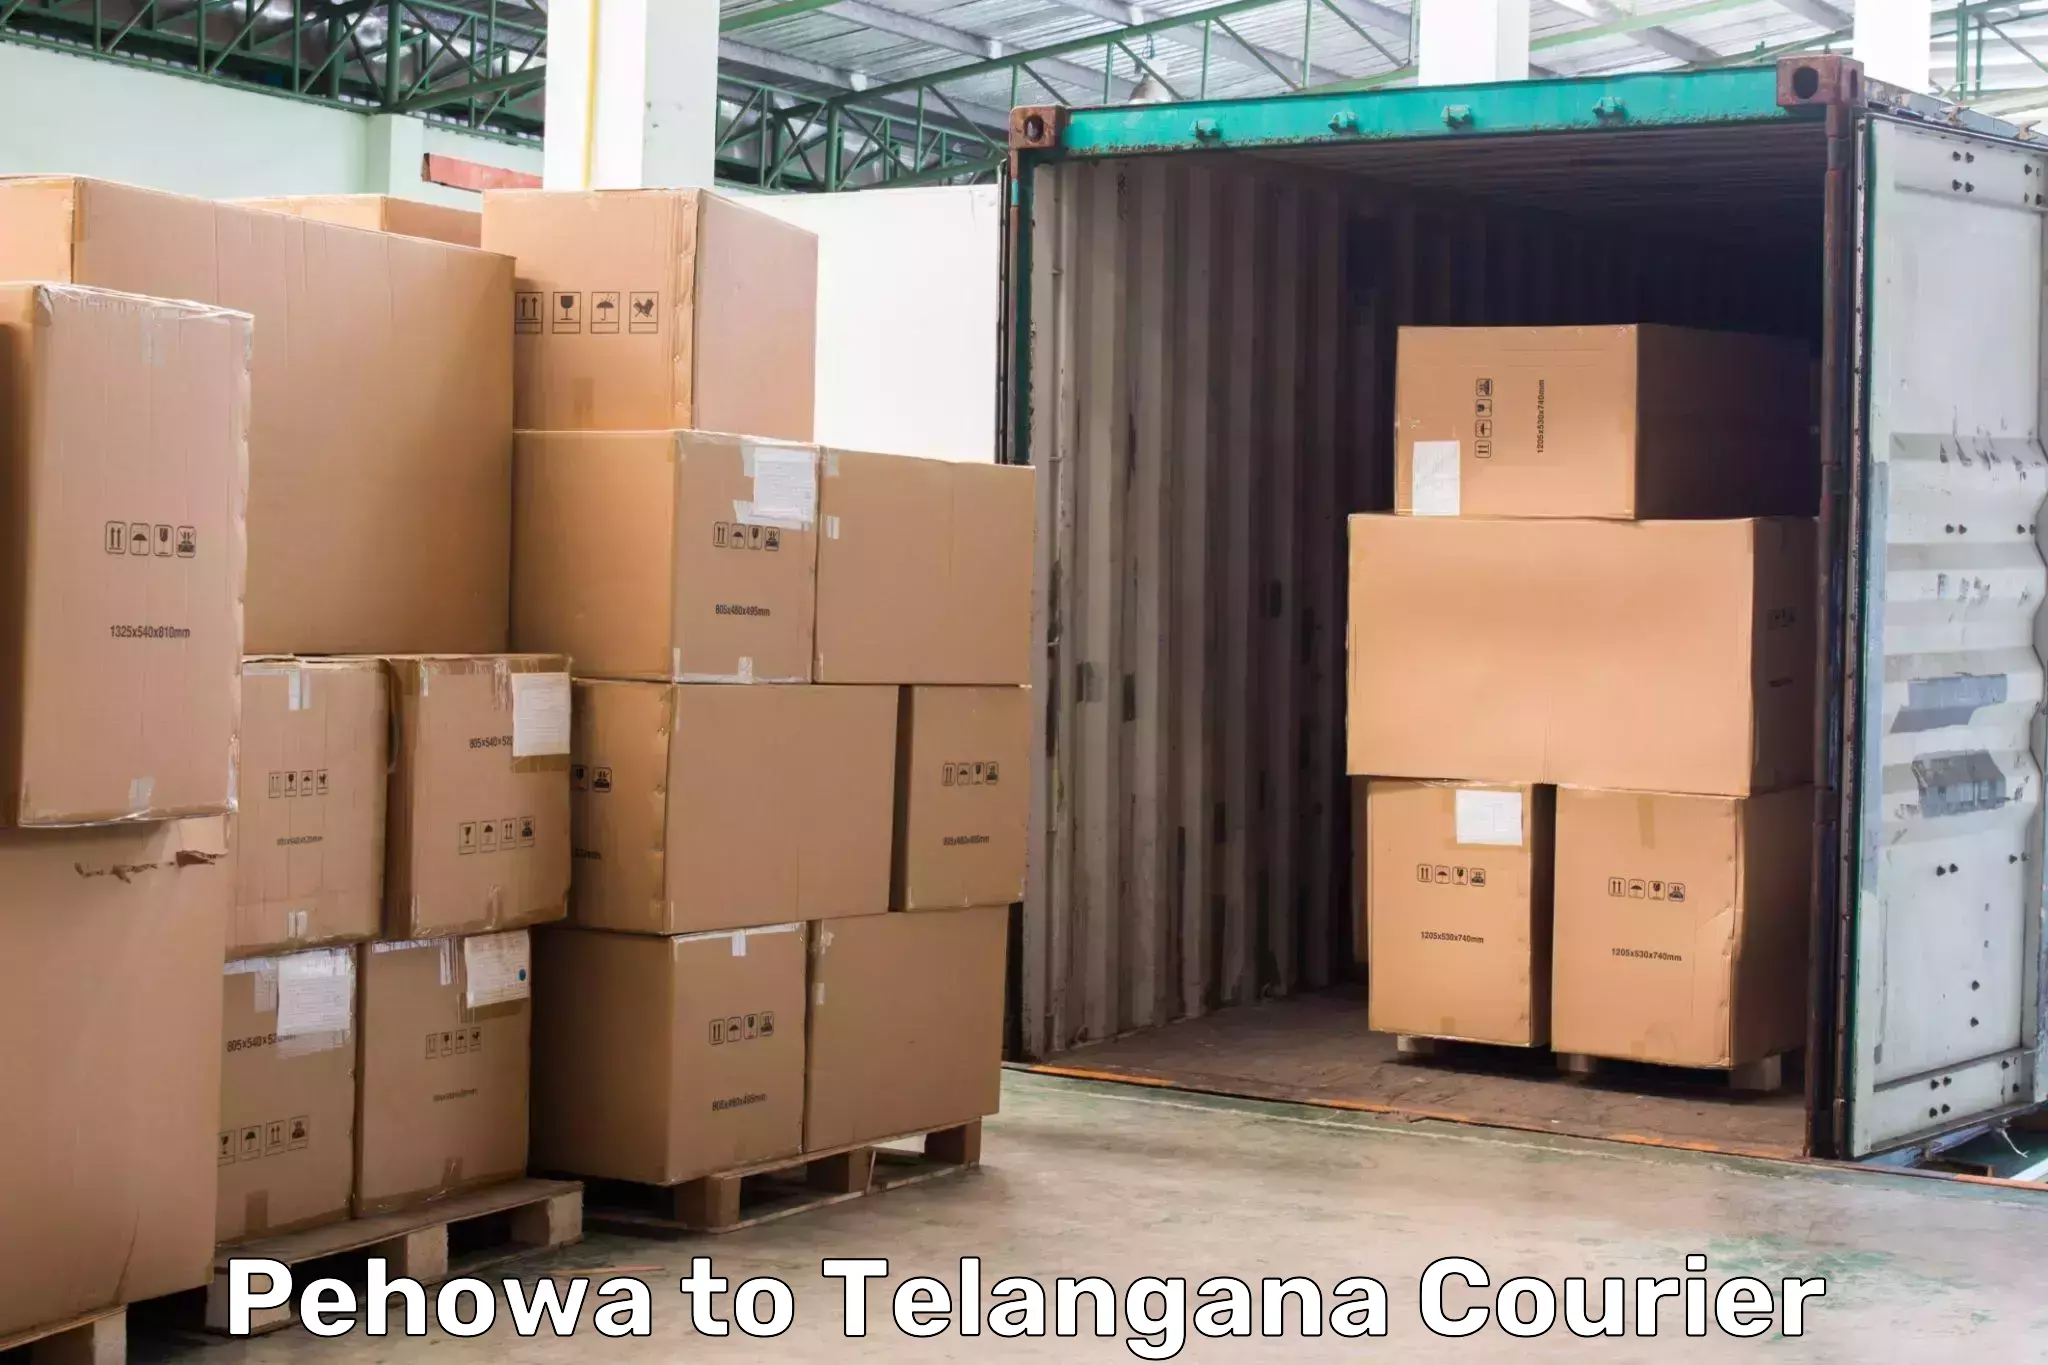 End-to-end delivery in Pehowa to Jogulamba Gadwal